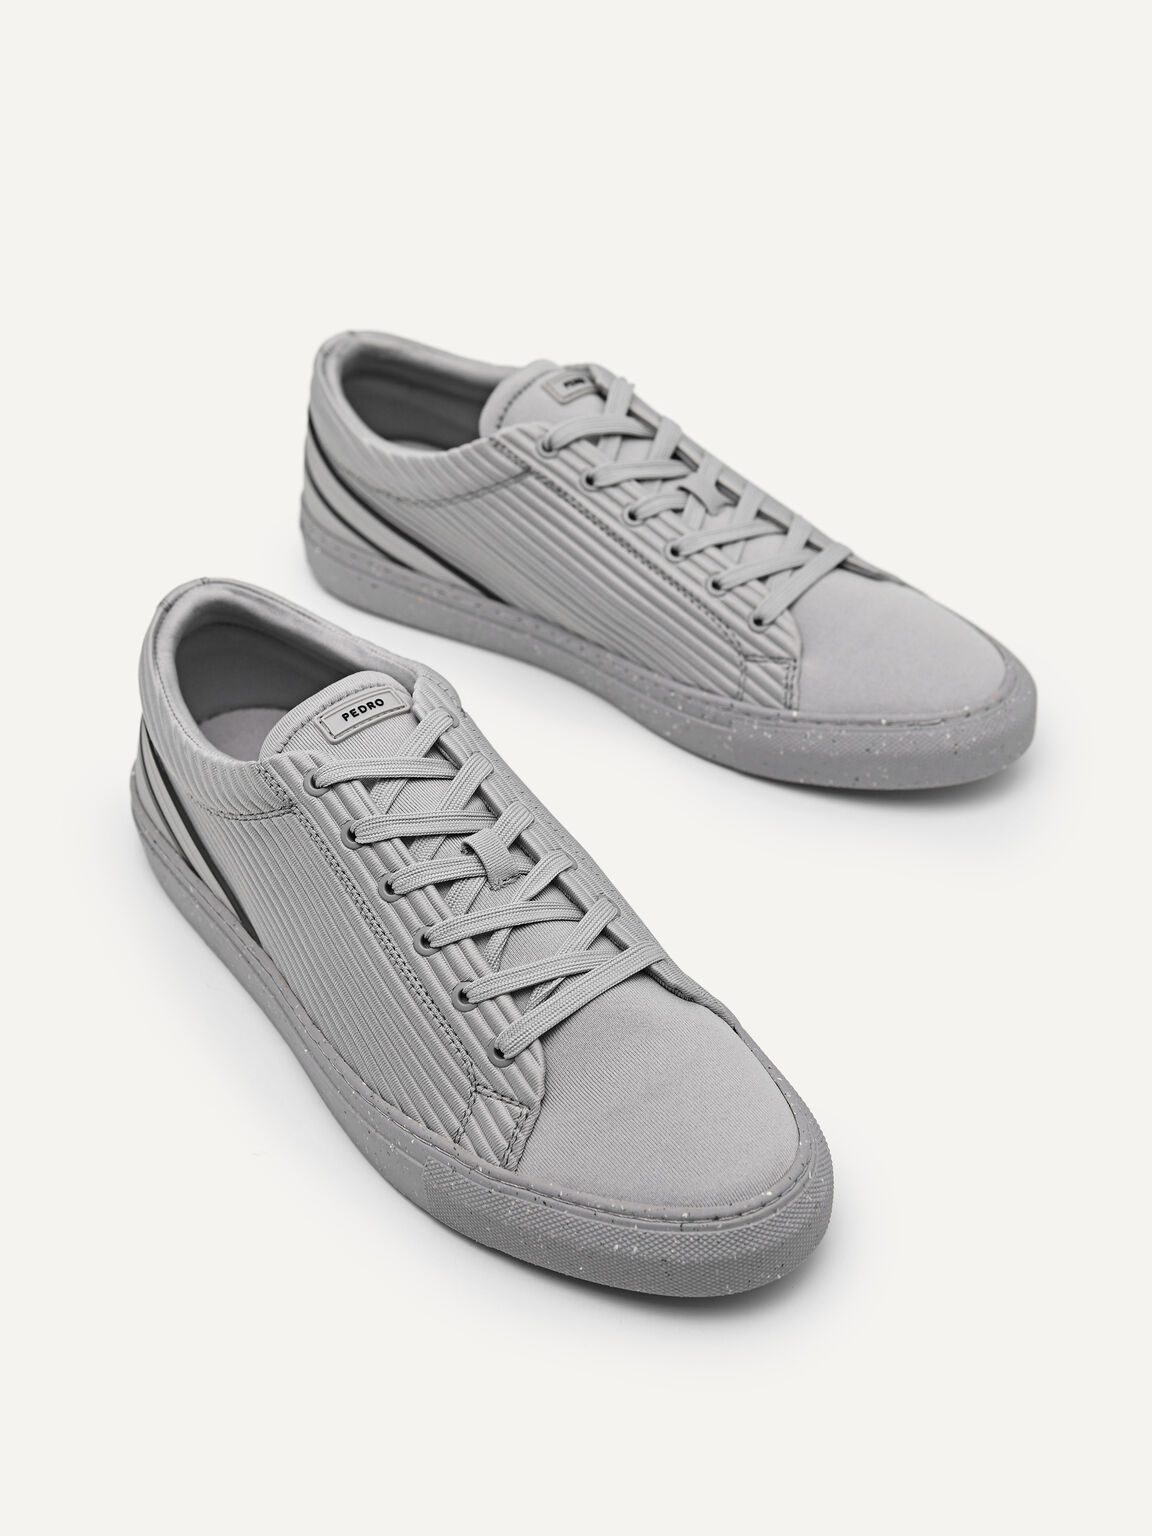 rePEDRO Pleated Sneakers, Grey, hi-res